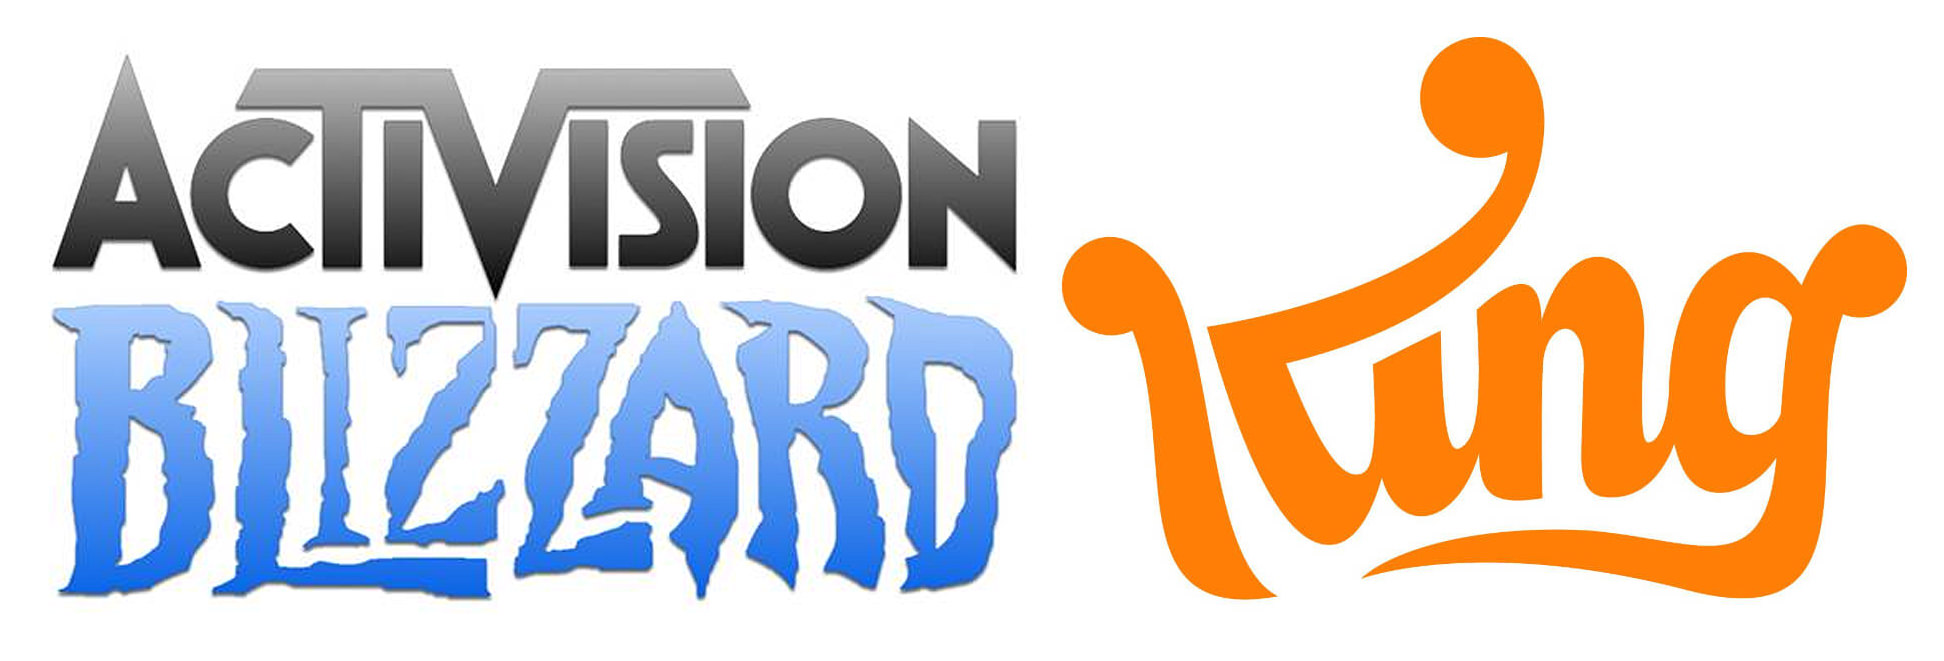 Blizzard king activision